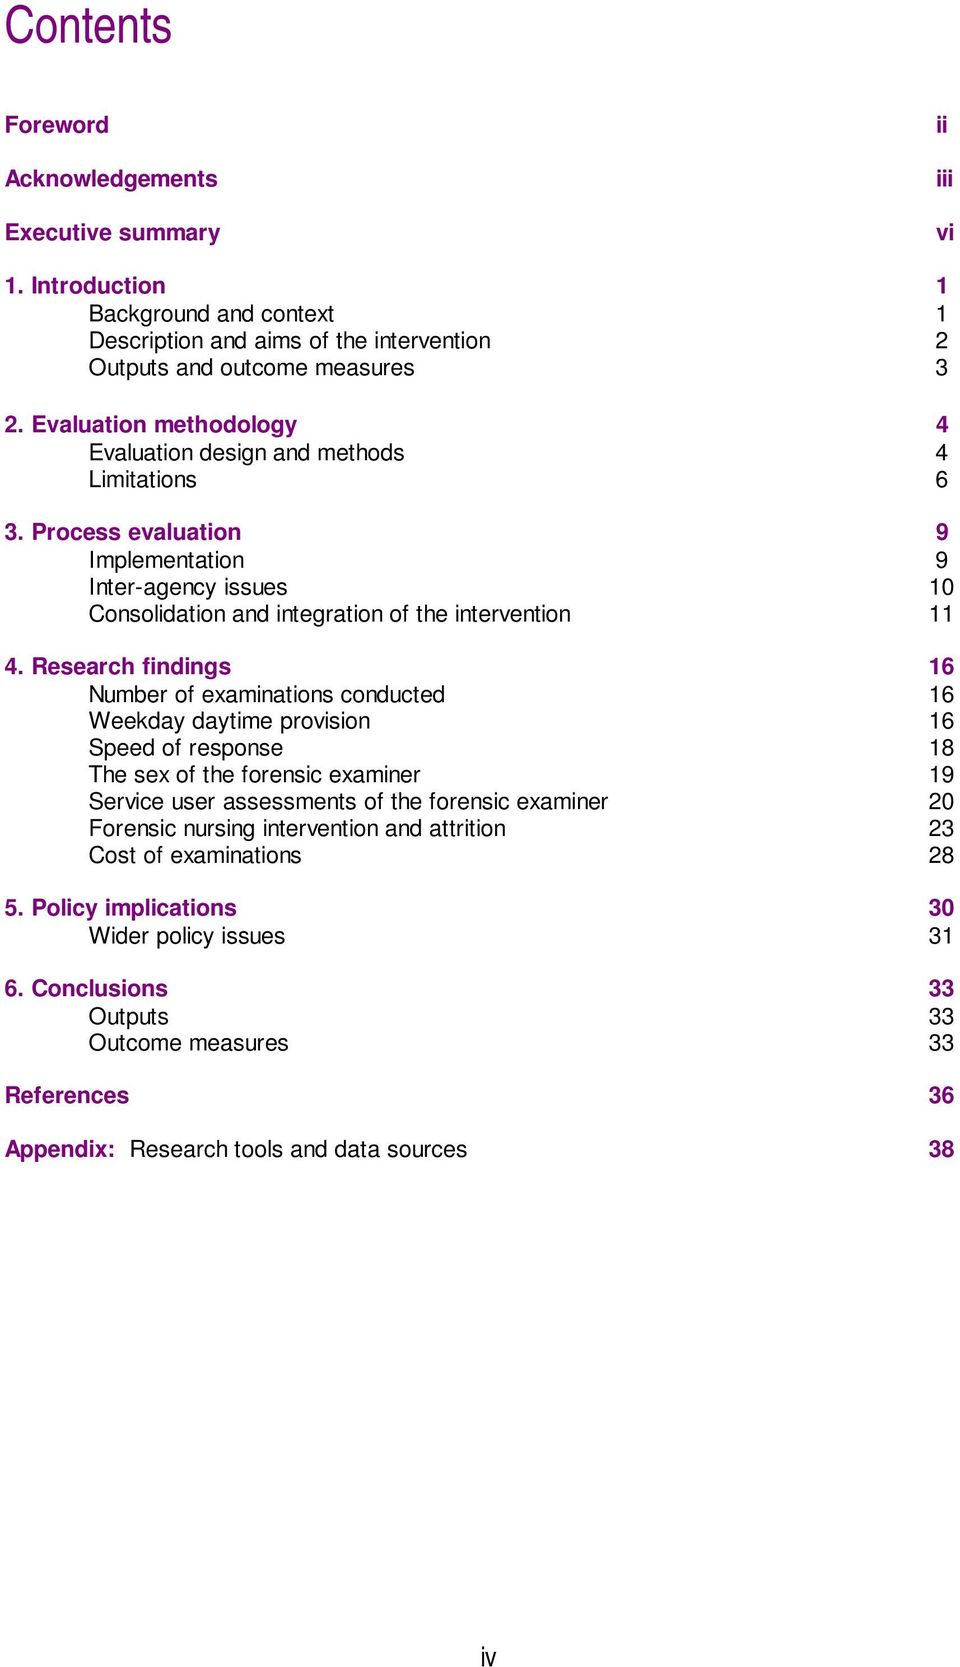 Research findings 16 Number of examinations conducted 16 Weekday daytime provision 16 Speed of response 18 The sex of the forensic examiner 19 Service user assessments of the forensic examiner 20